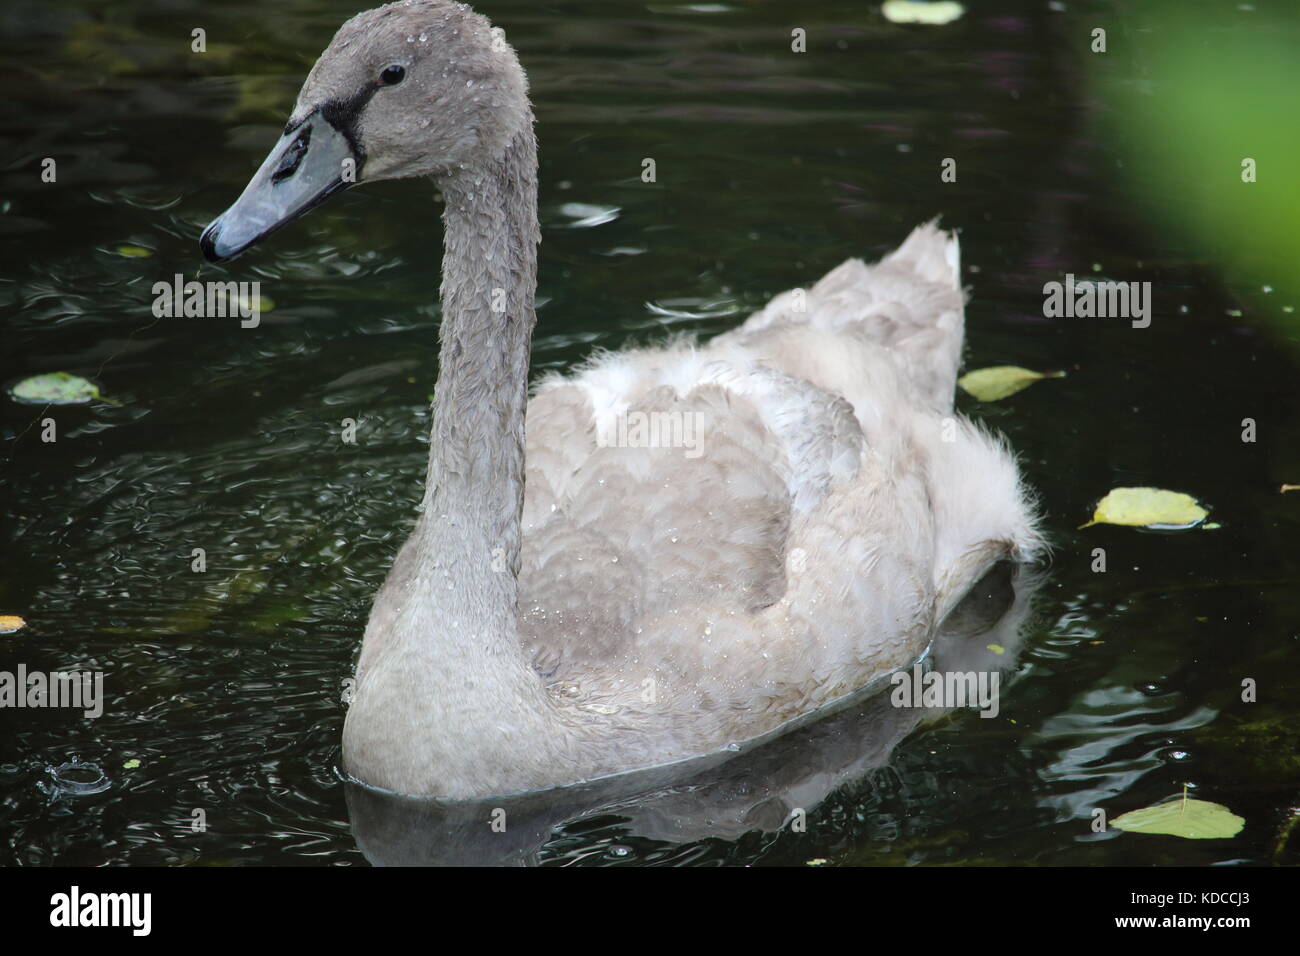 Young swan on a pond Stock Photo